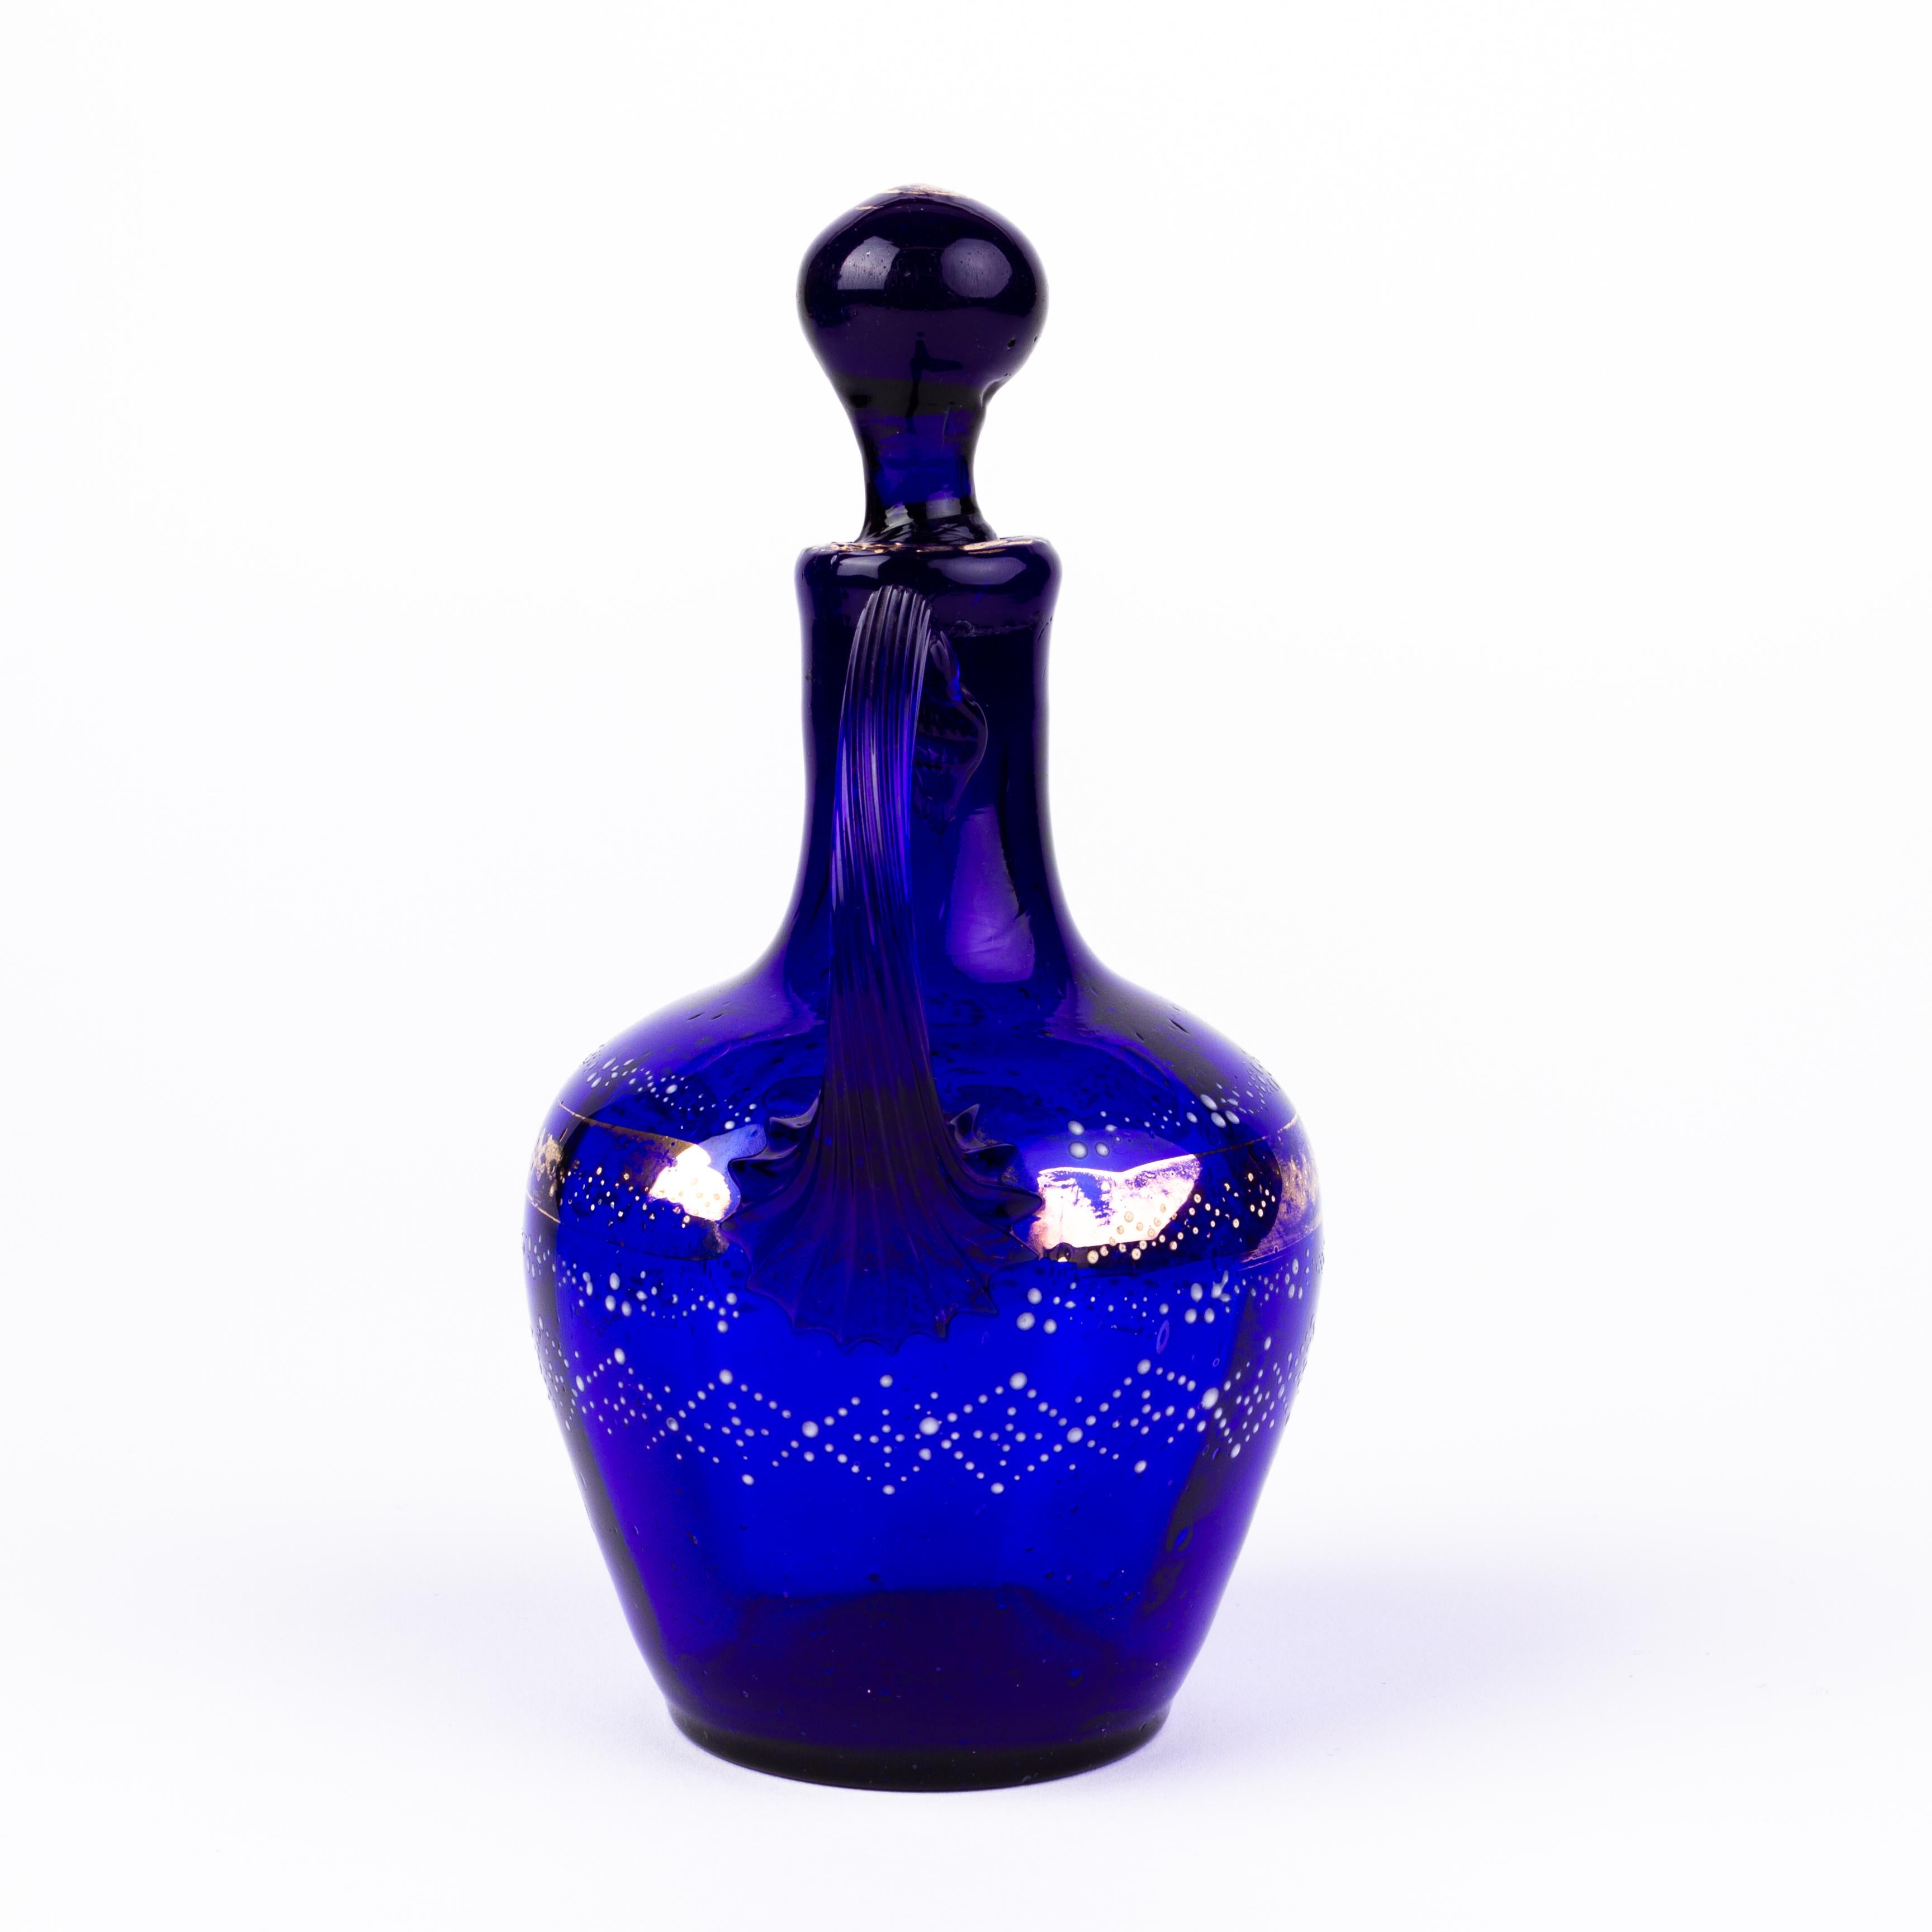 In good condition
From a private collection
Bristol Blue Victorian Glass Decanter 19th Century